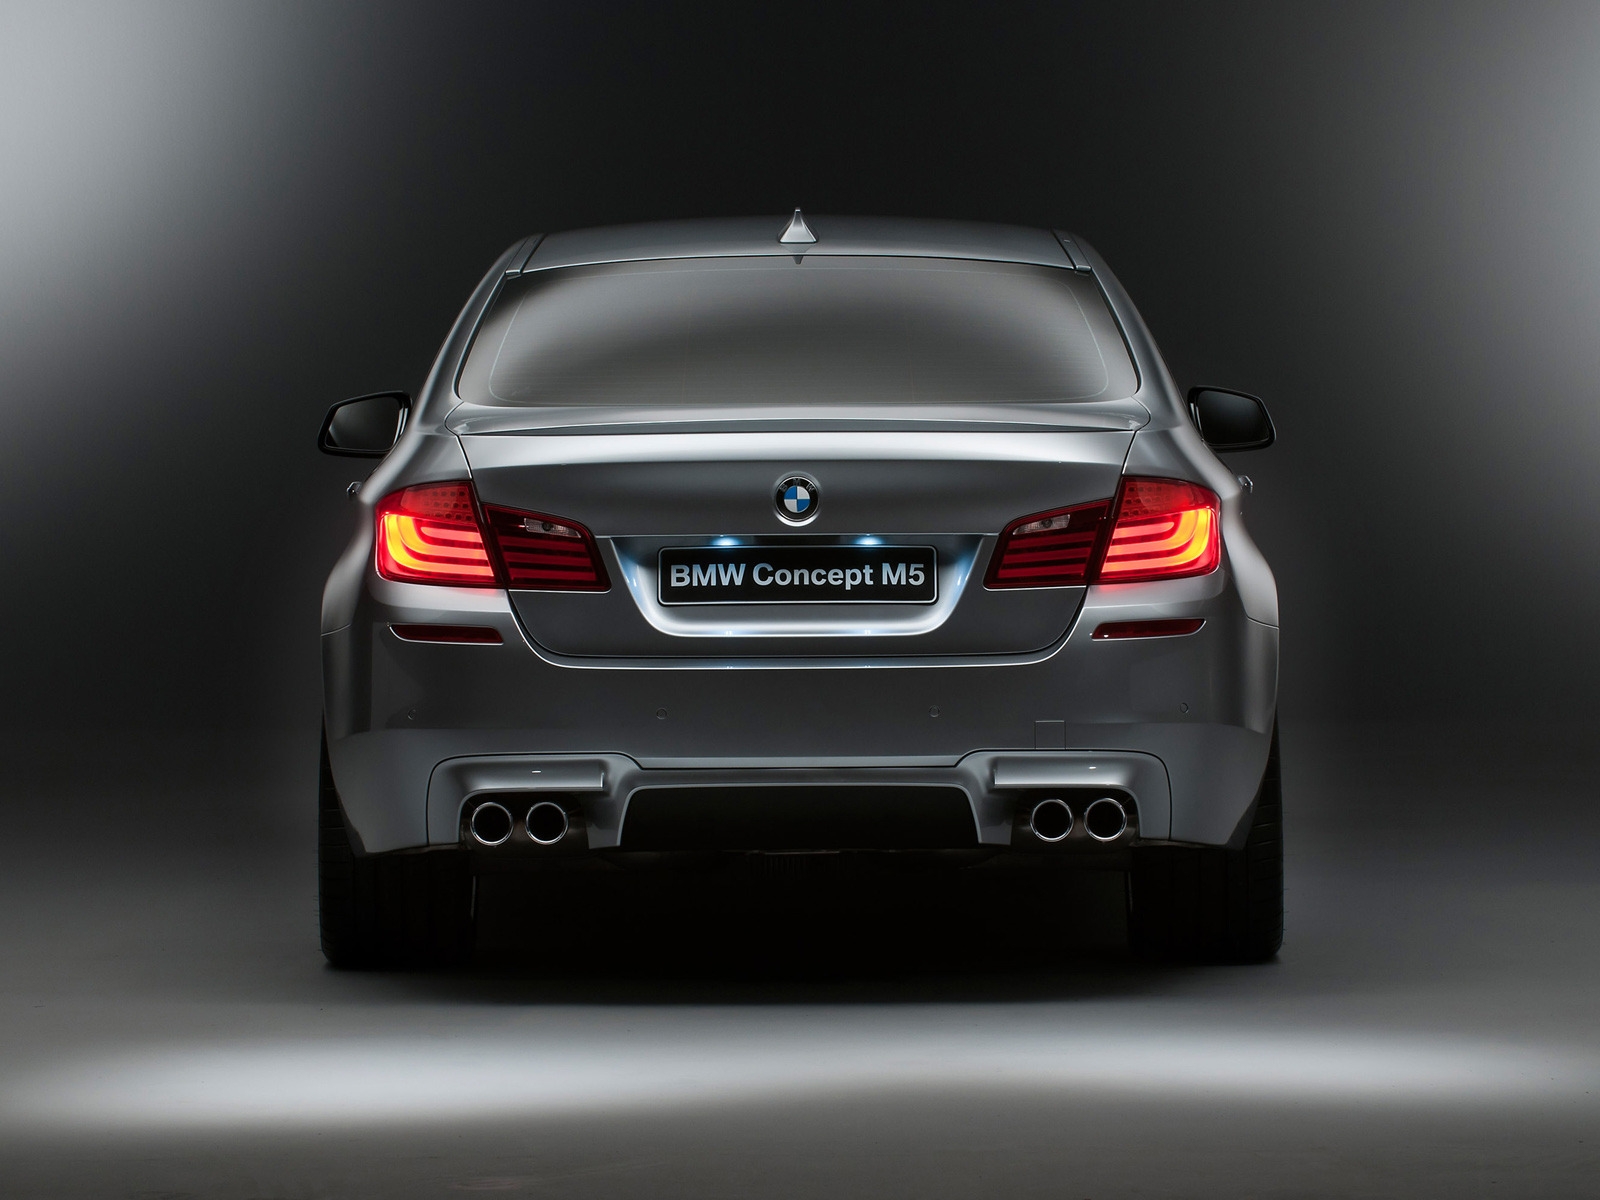 BMW M5 Concept 2012 Rear for 1600 x 1200 resolution